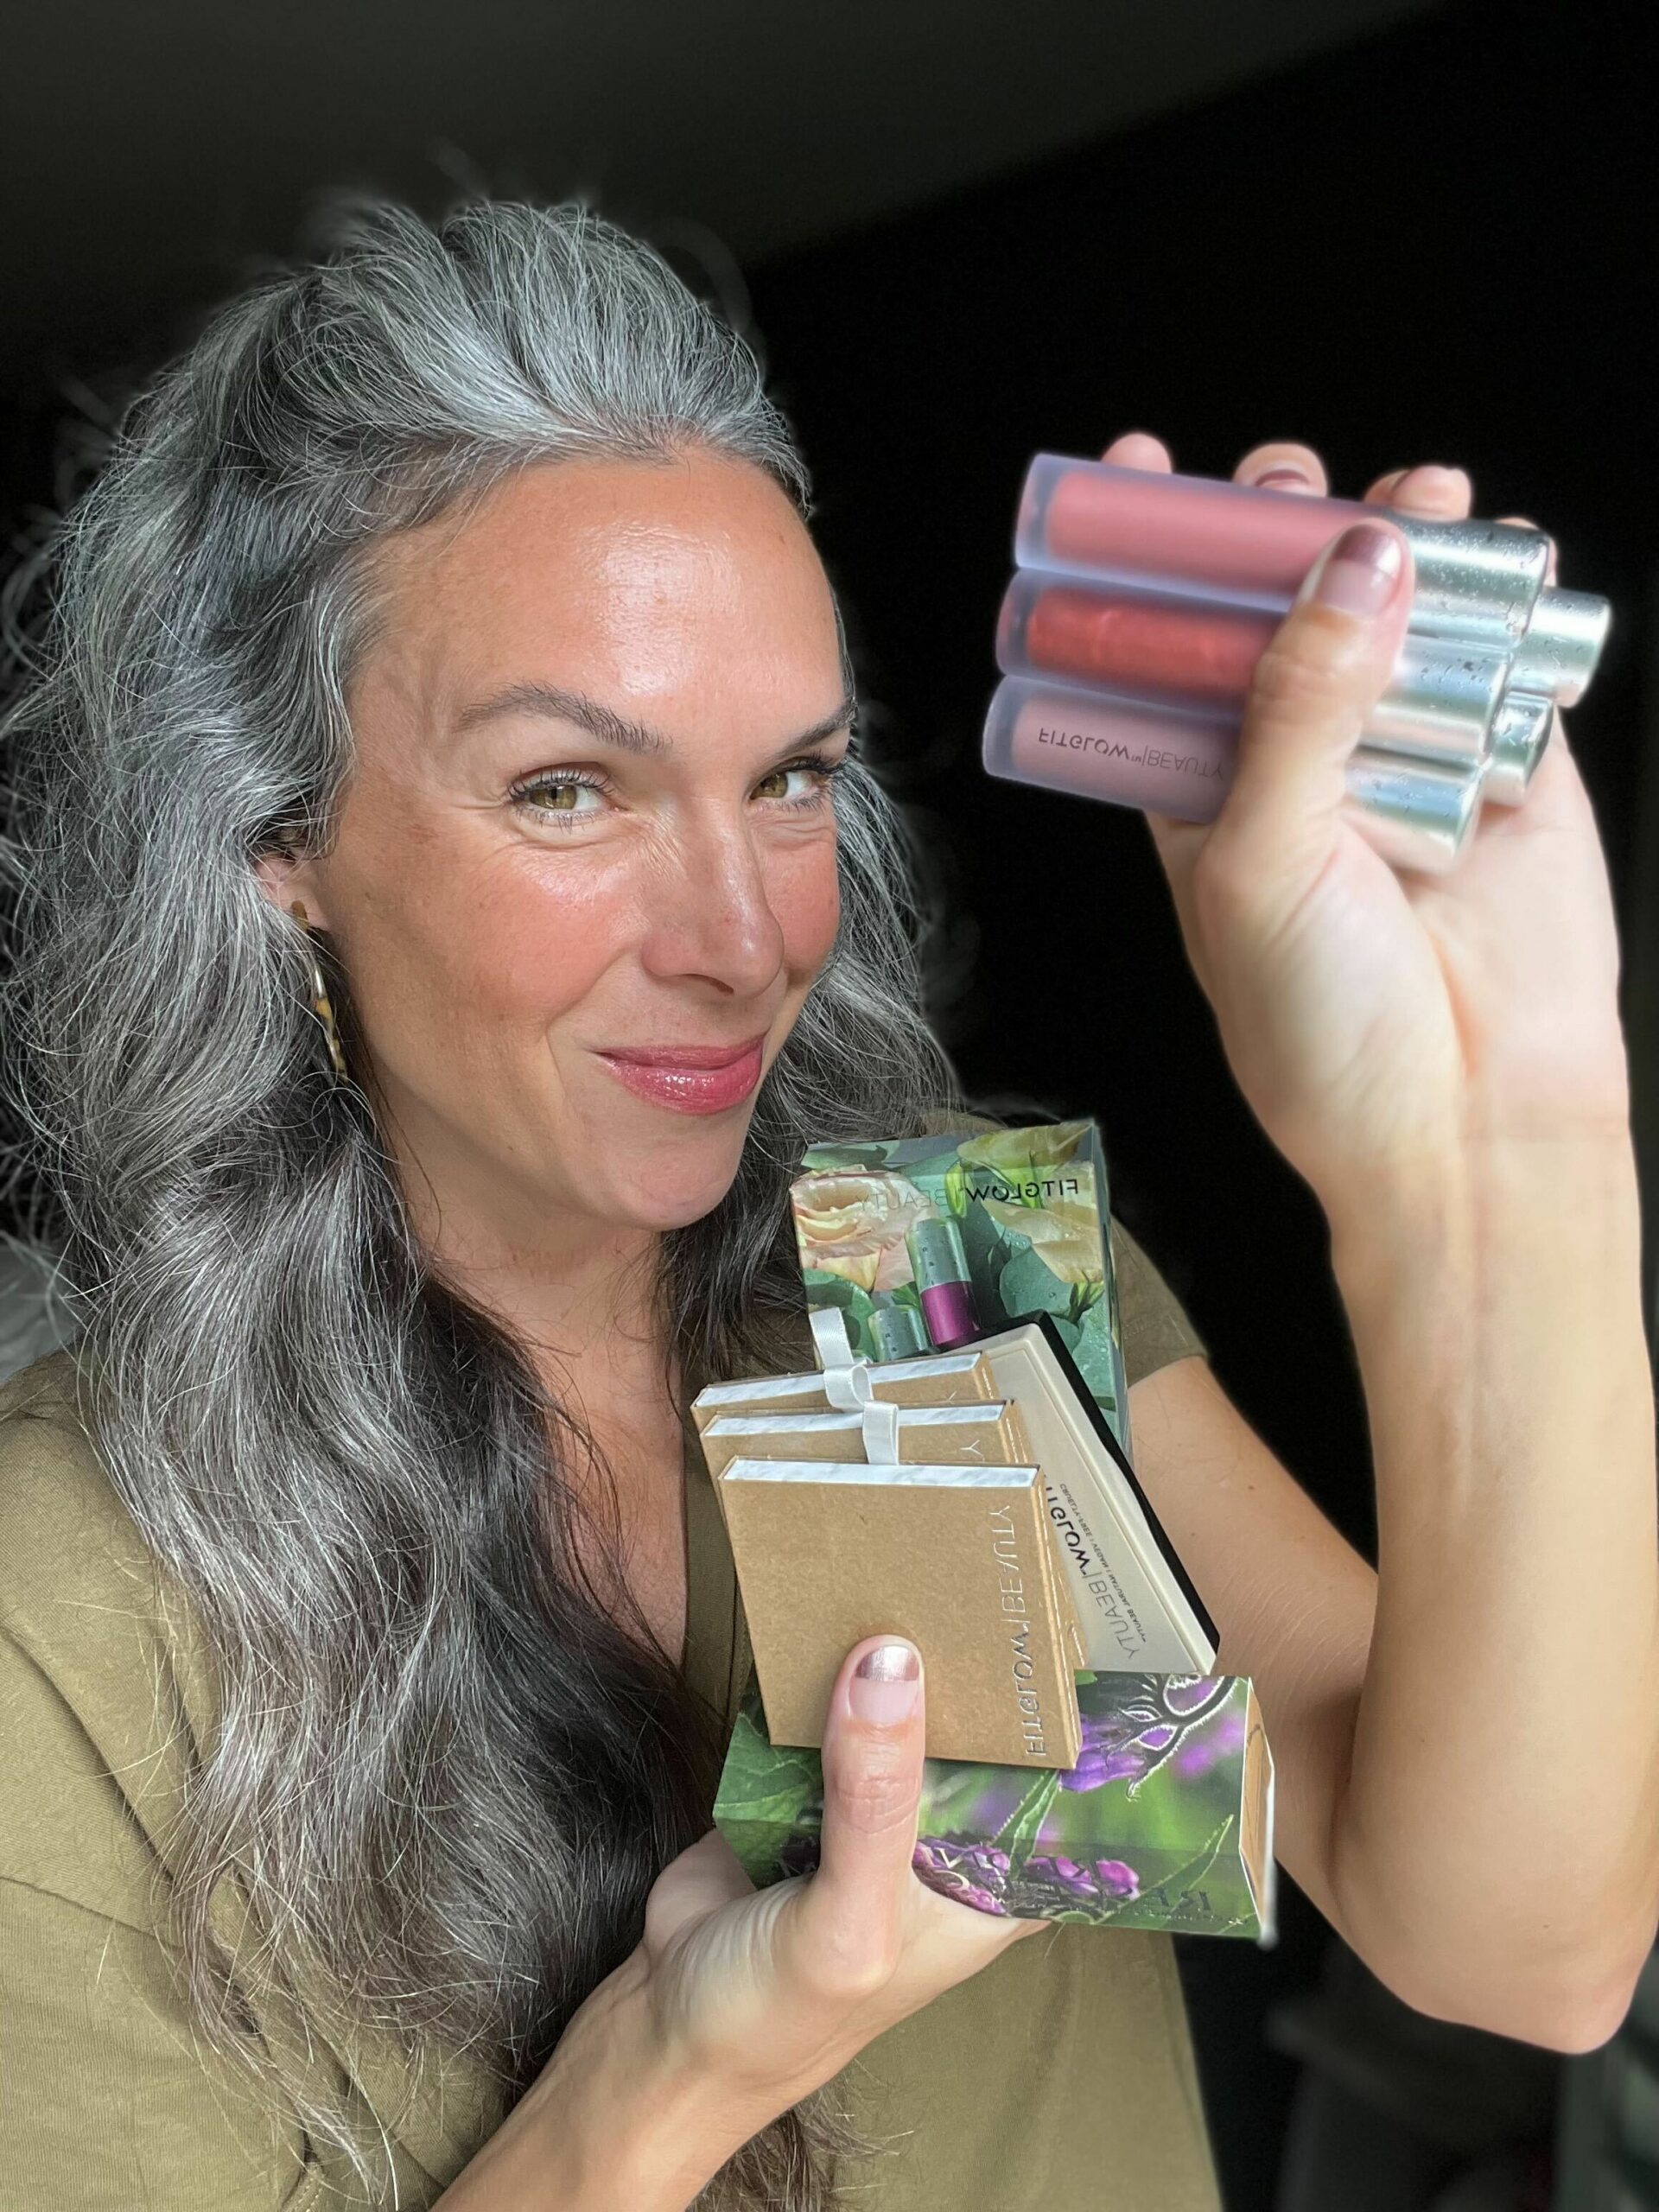 A woman with curly gray hair holds up products from Fitglow Beauty.